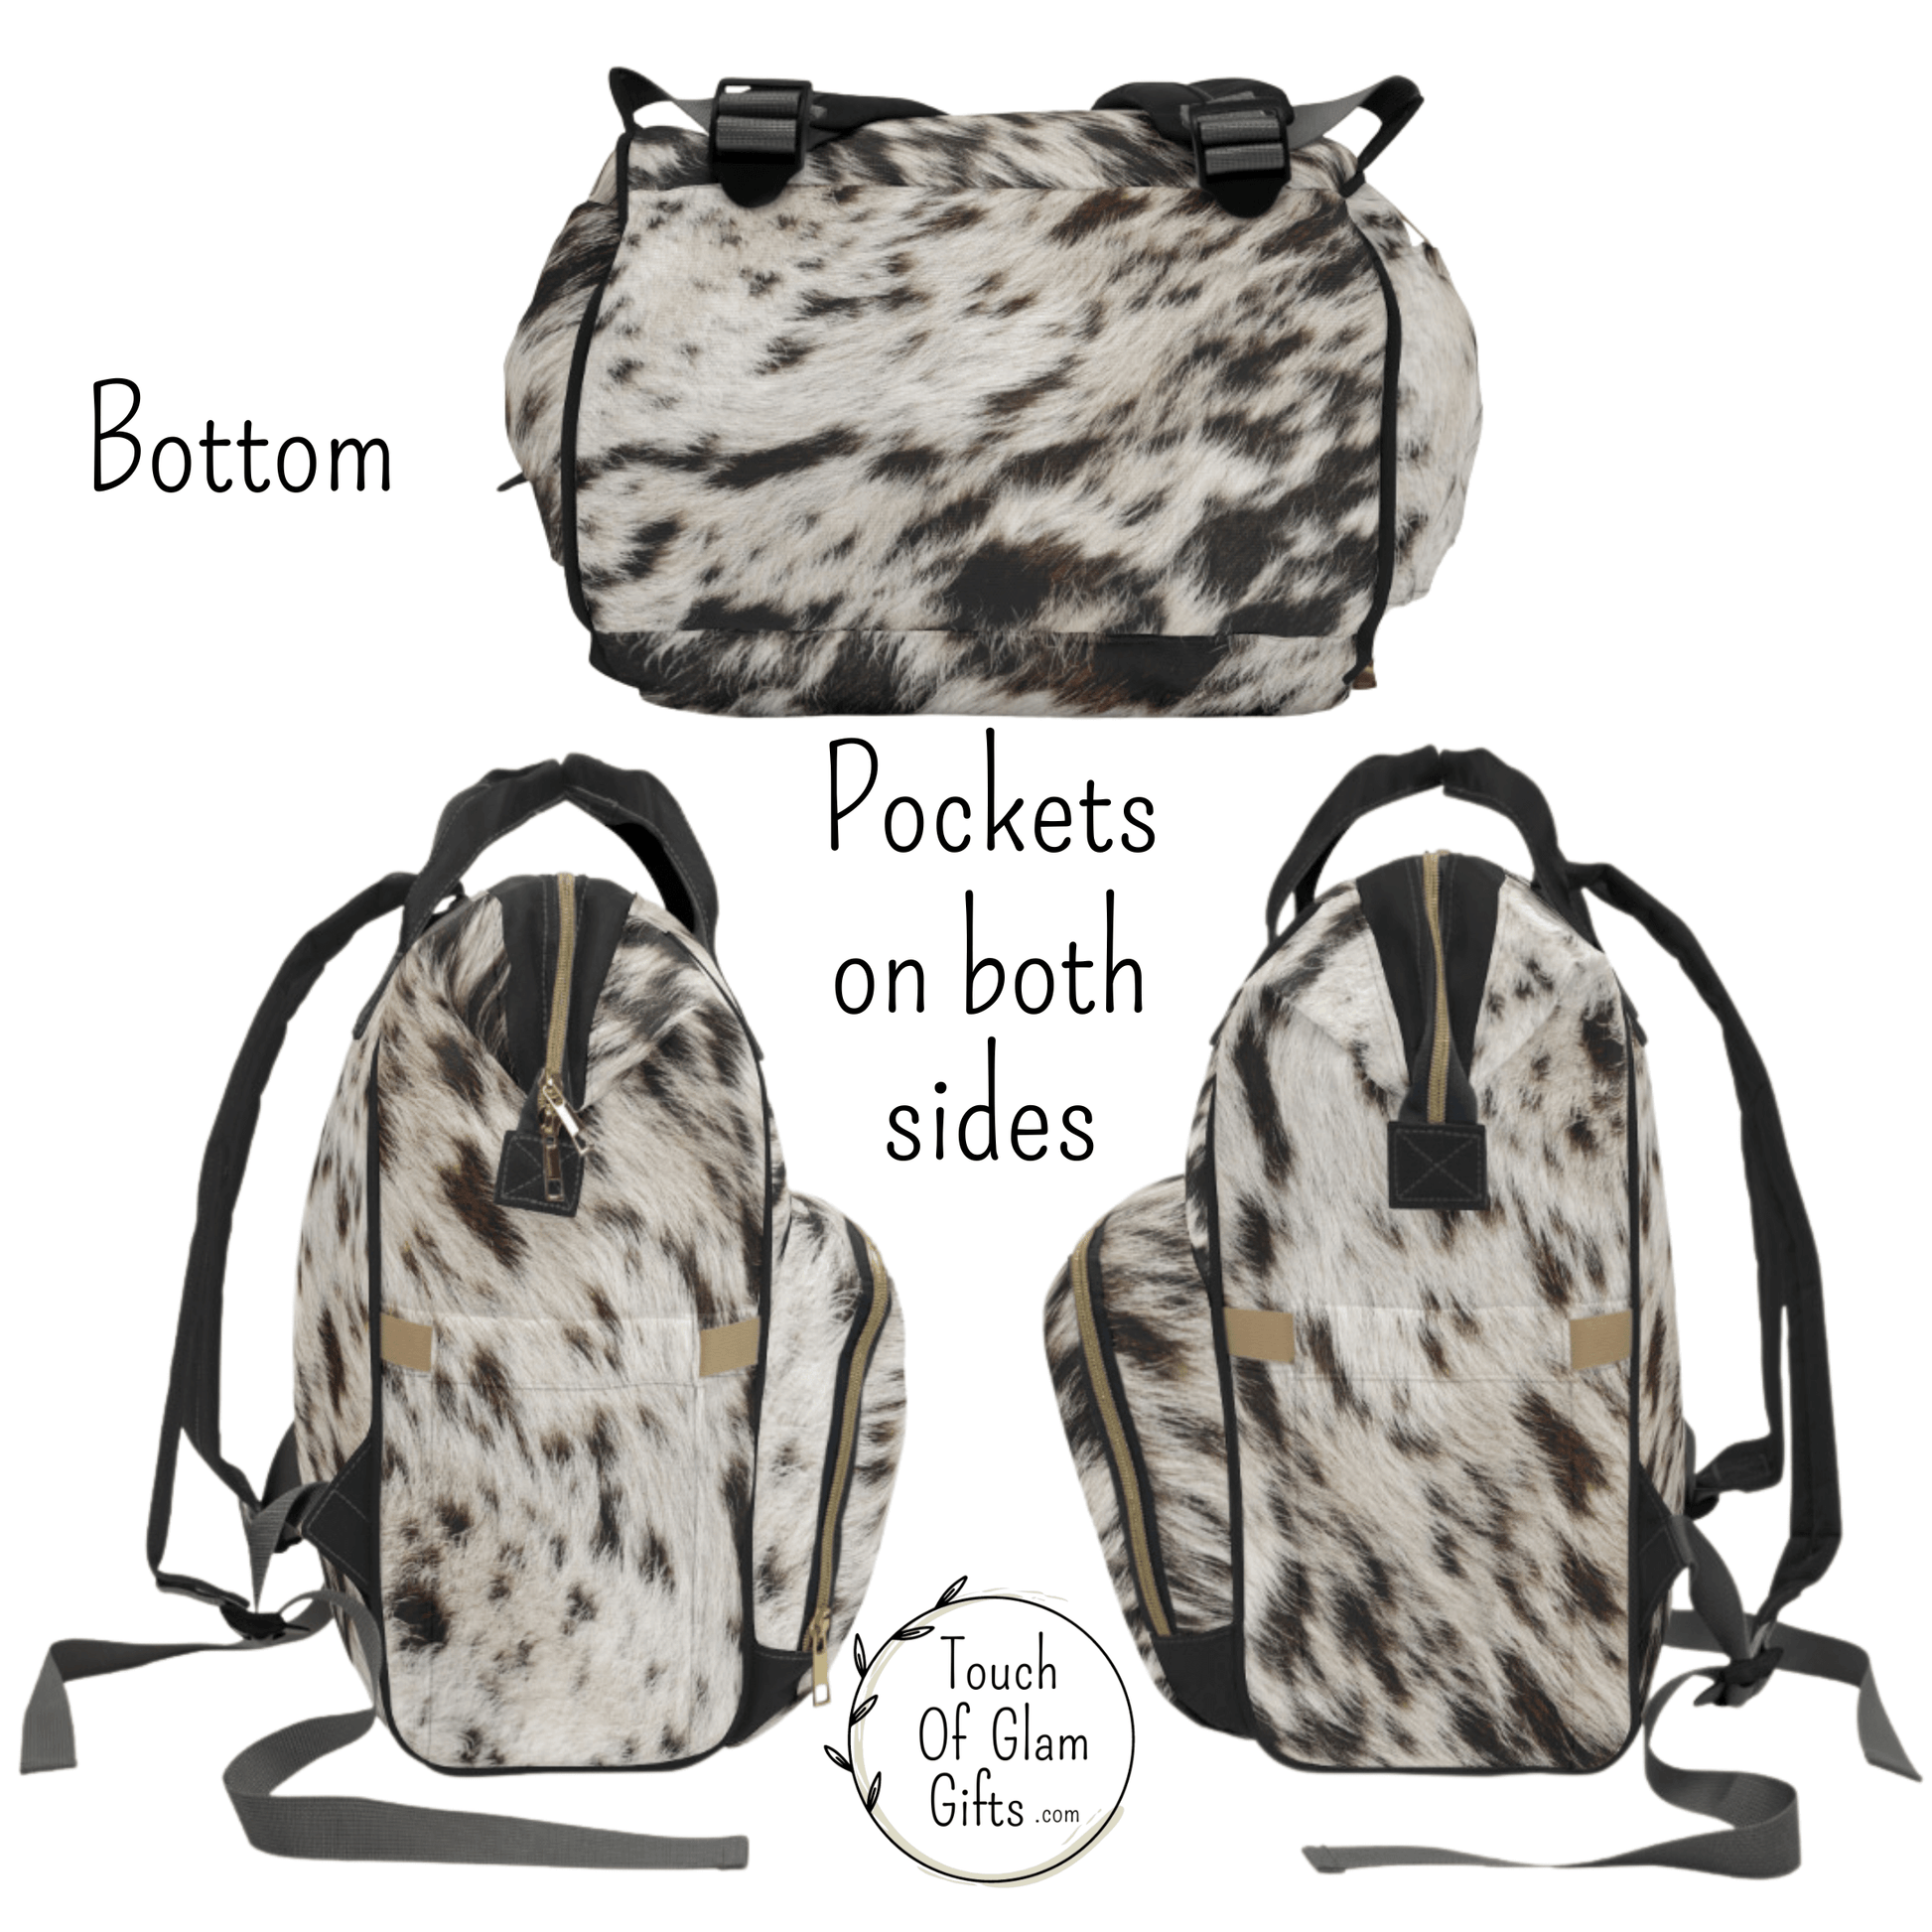 The bottom of the cow print backpack had cowhide print and both sides have pockets on the exterior for holding water bottles or baby bottles.